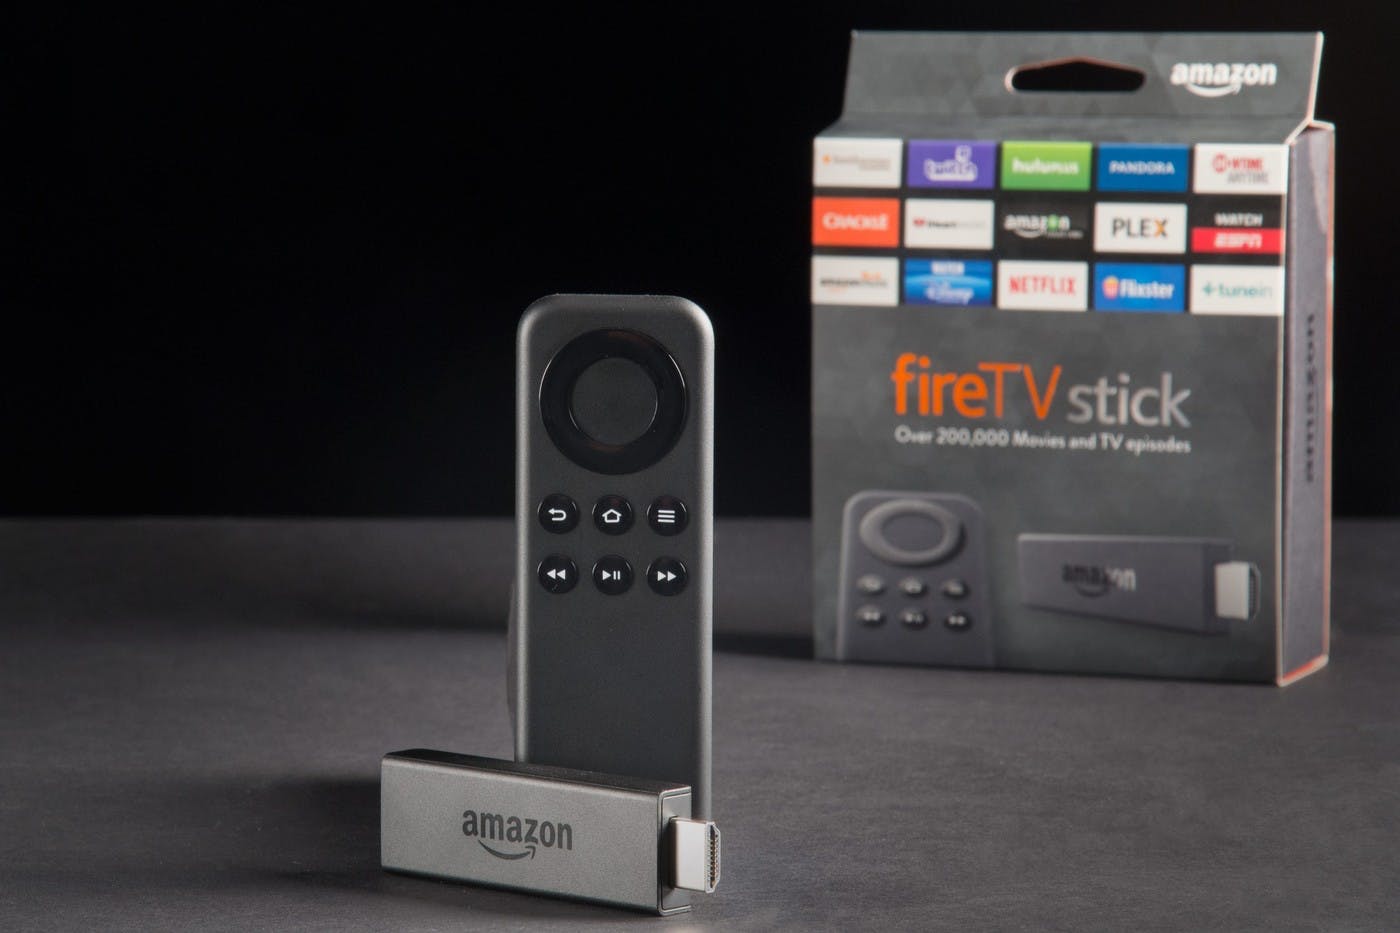 Amazon Fire TV Stick features